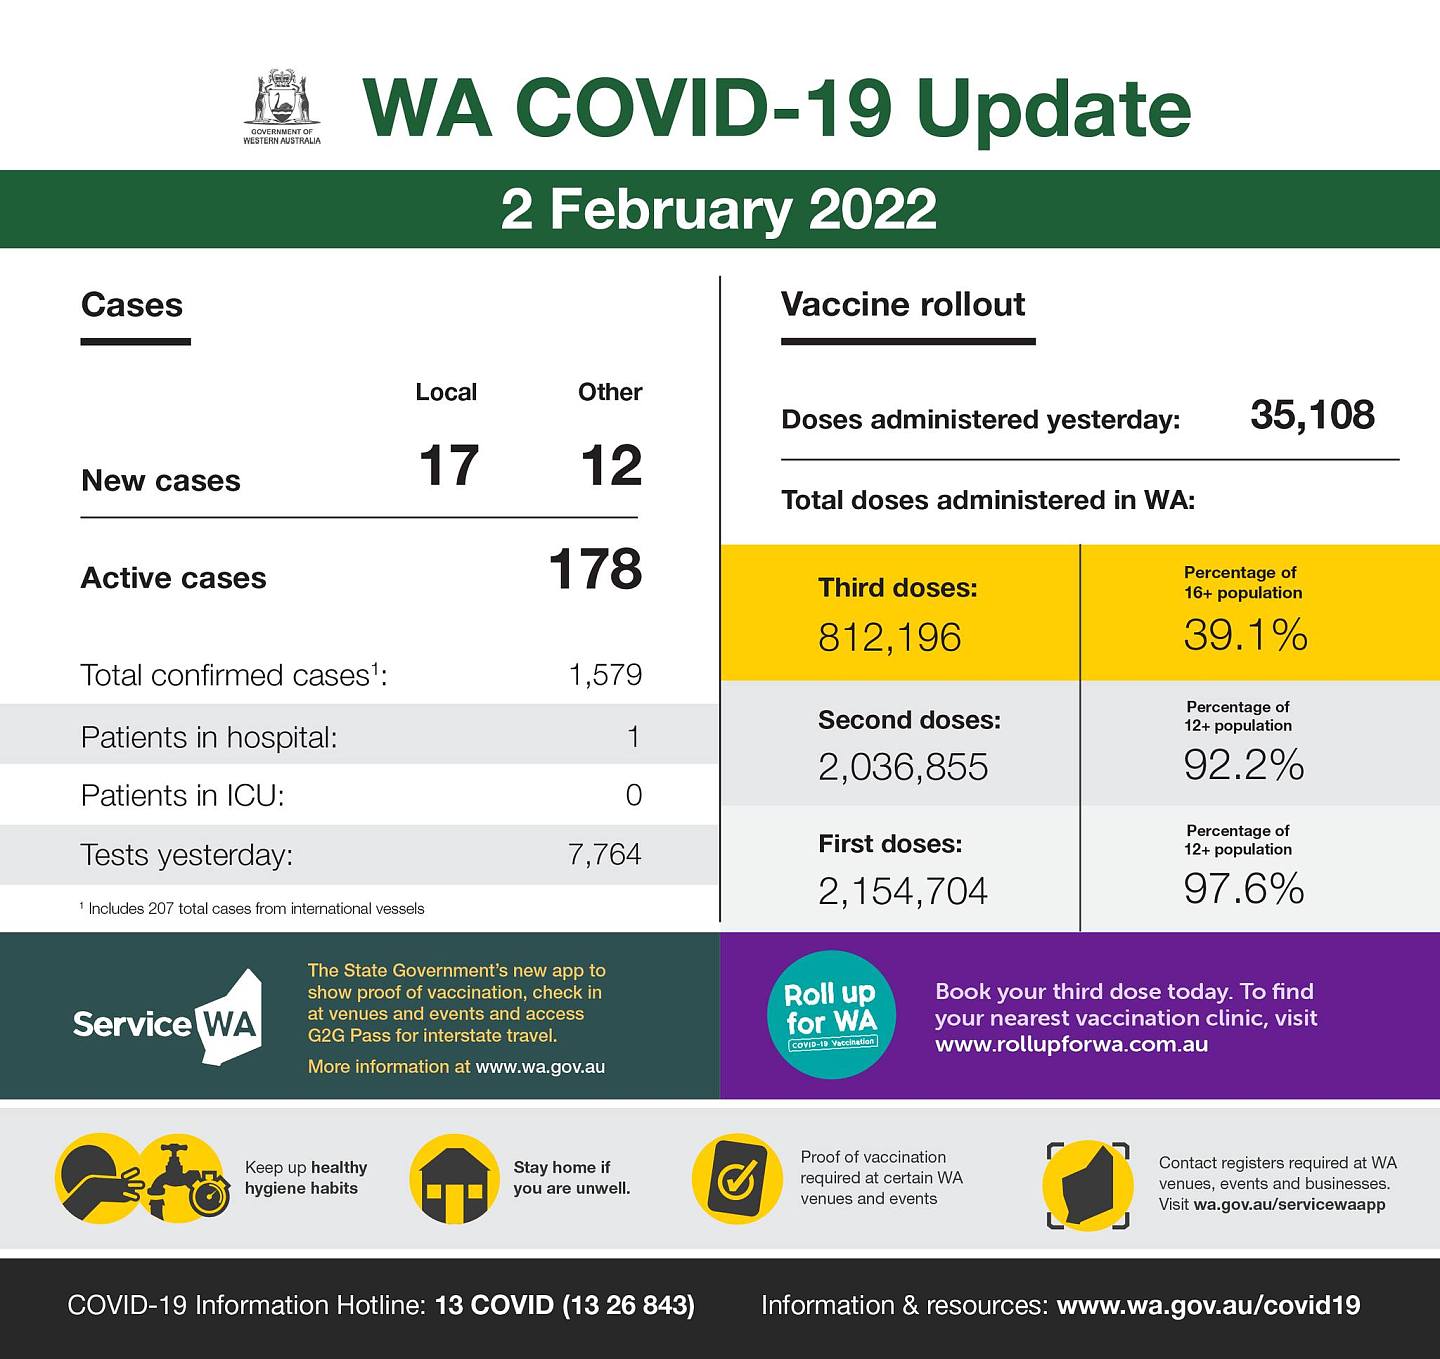 May be an image of text that says 'Cases WA COVID-19 Update 2 February 2022 Local Vaccine rollout New cases Other 17 12 Active cases administered yesterday: 35,108 108 Total doses administered in WA: 178 Total confirmed cases1: Patients in hospital: Third doses: 812,196 1,579 Patients ICU: Percentage 6+population 39.1% 1 Tests yesterday: 0 Includes to Second doses: 2,036,855 036, cases nternationa vessels 7,764 Percentage 12+population 92.2% First doses: Service WA Perntagf 97.6% Roll up WA Keepu healthy hygieneh habits Bookyou third dose today. find clinic, visit www.rollupforwa.com.at Stay home you eunwell. COVID- 19 nformation Hotline: required tWA COVID (13 26 843) venues. a.gov.au/servicewaapp Information &'